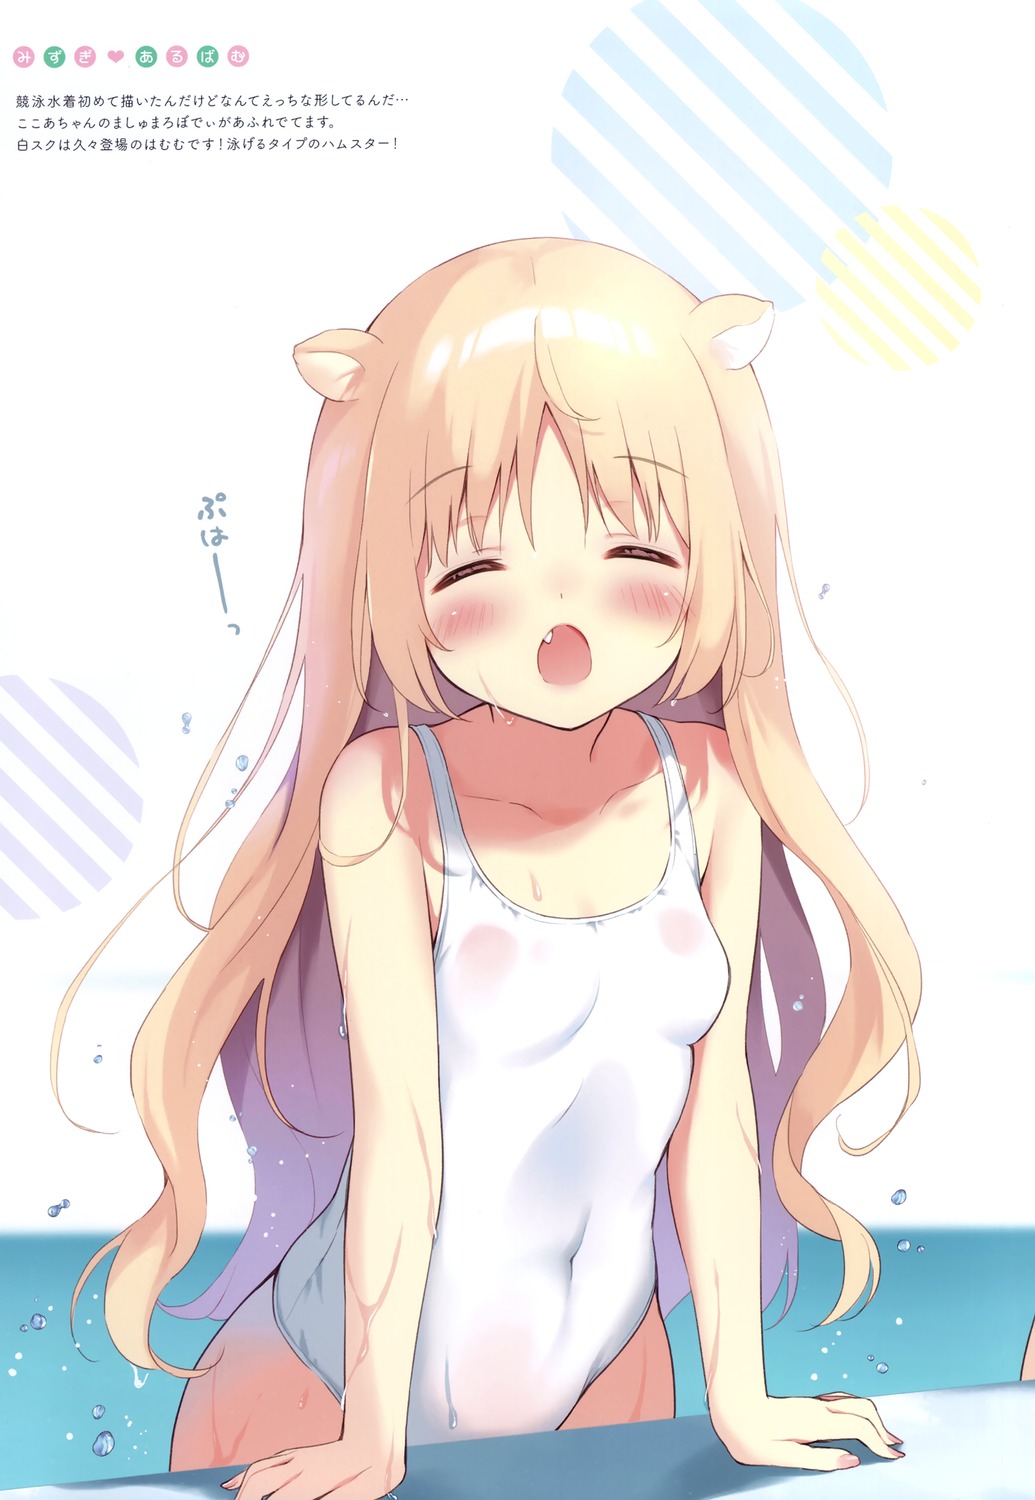 animal_ears pan see_through swimsuits wet wet_clothes